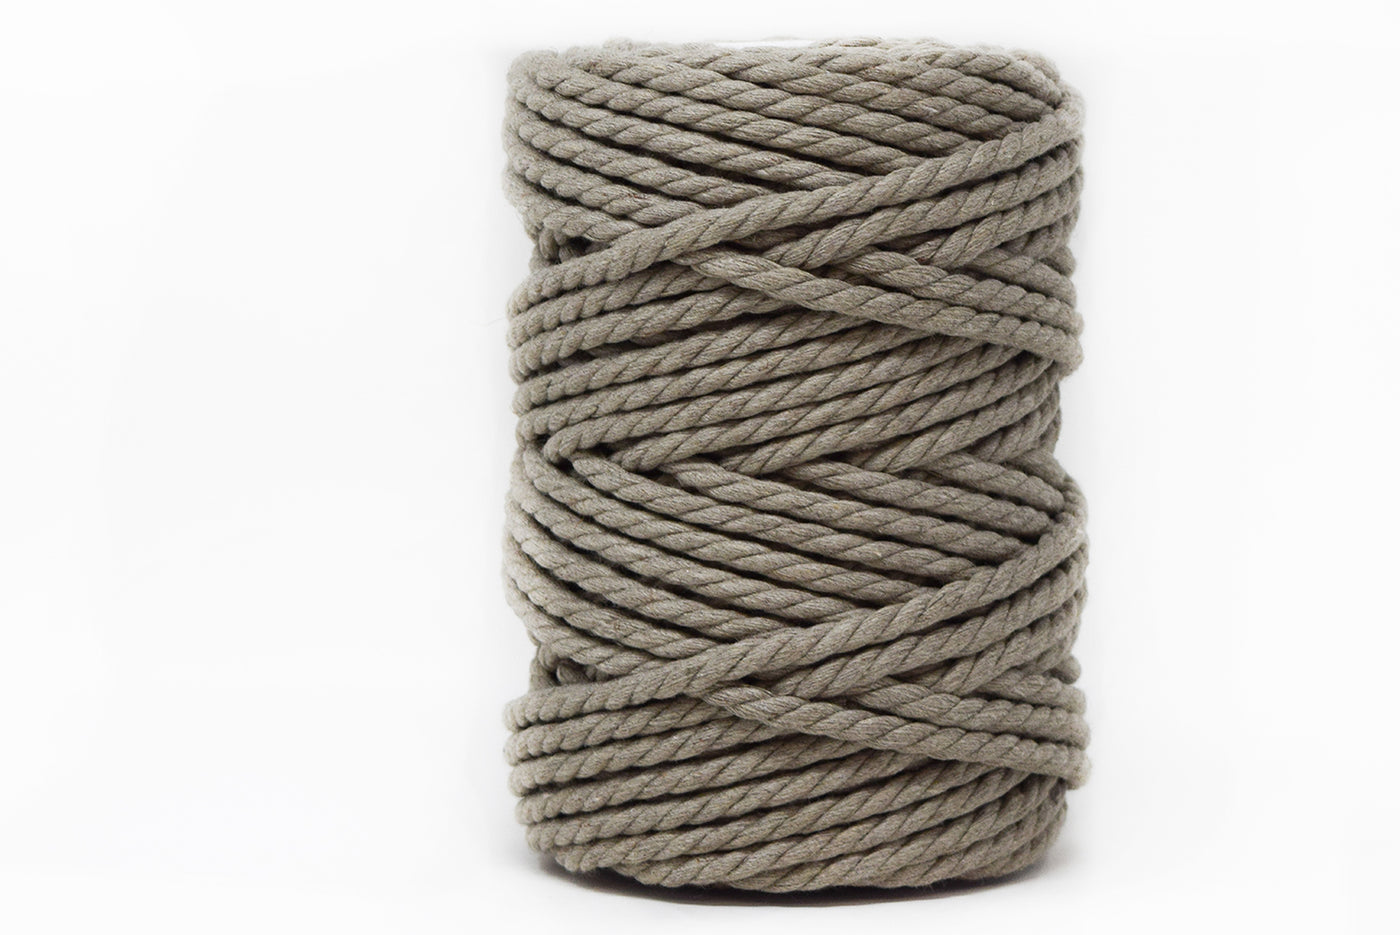 COTTON ROPE ZERO WASTE 5 MM - 3 PLY  - TAUPE COLOR